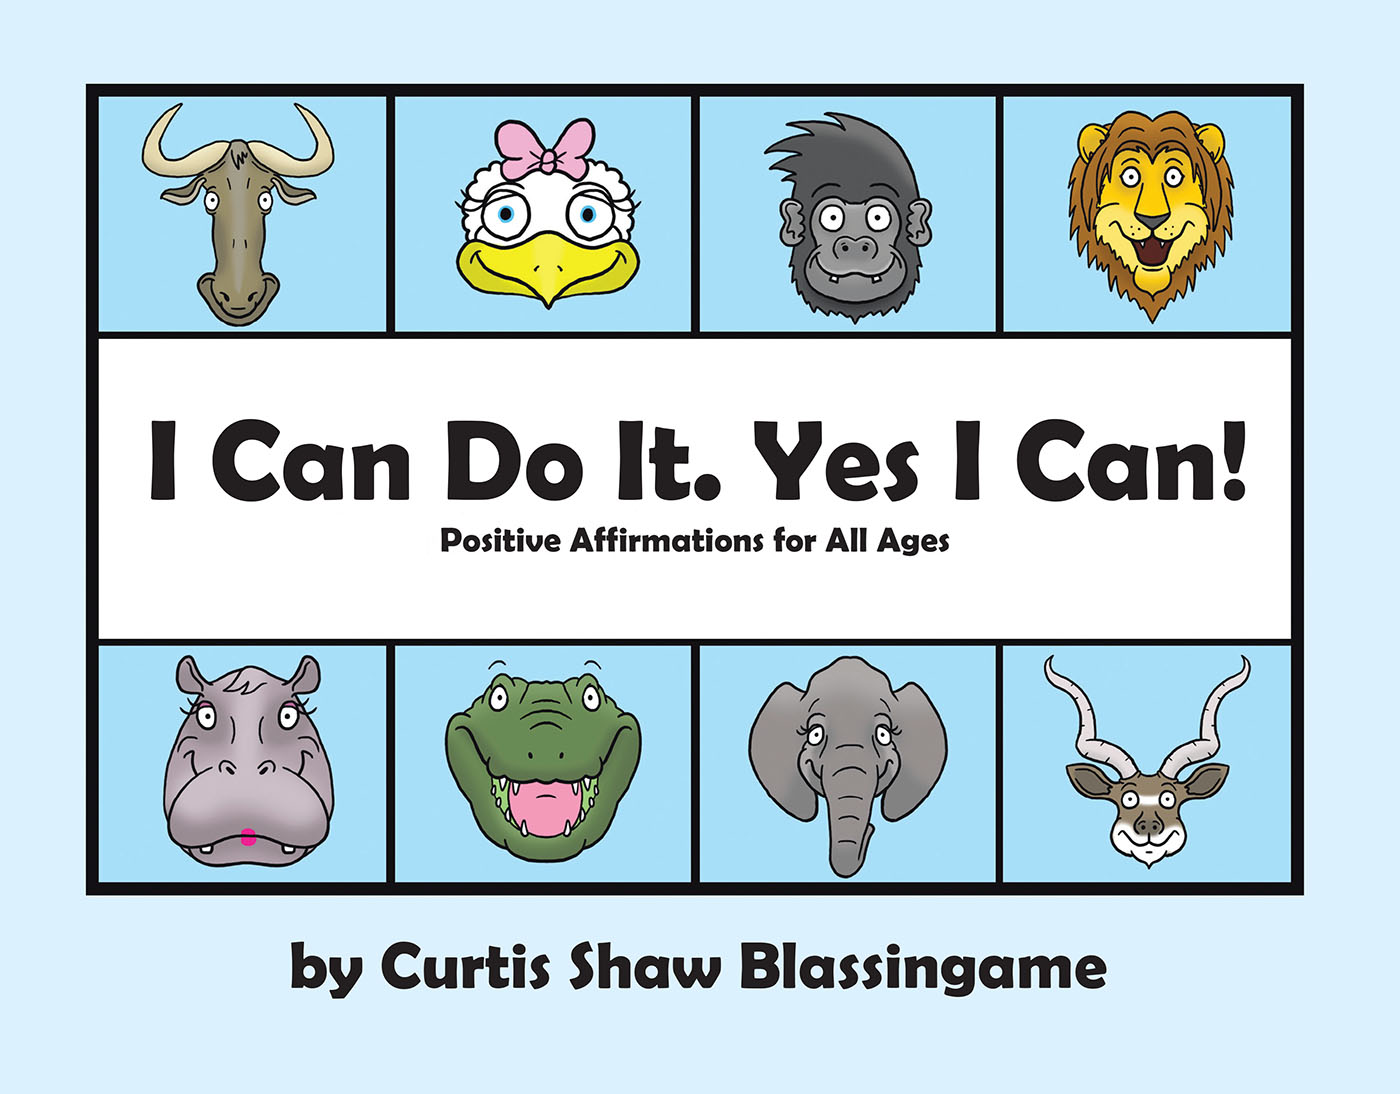 Curtis Blassingame New Children’s Book Focuses on Developing a Positive Subconscious That Will Support Good Character Traits and Decision Making